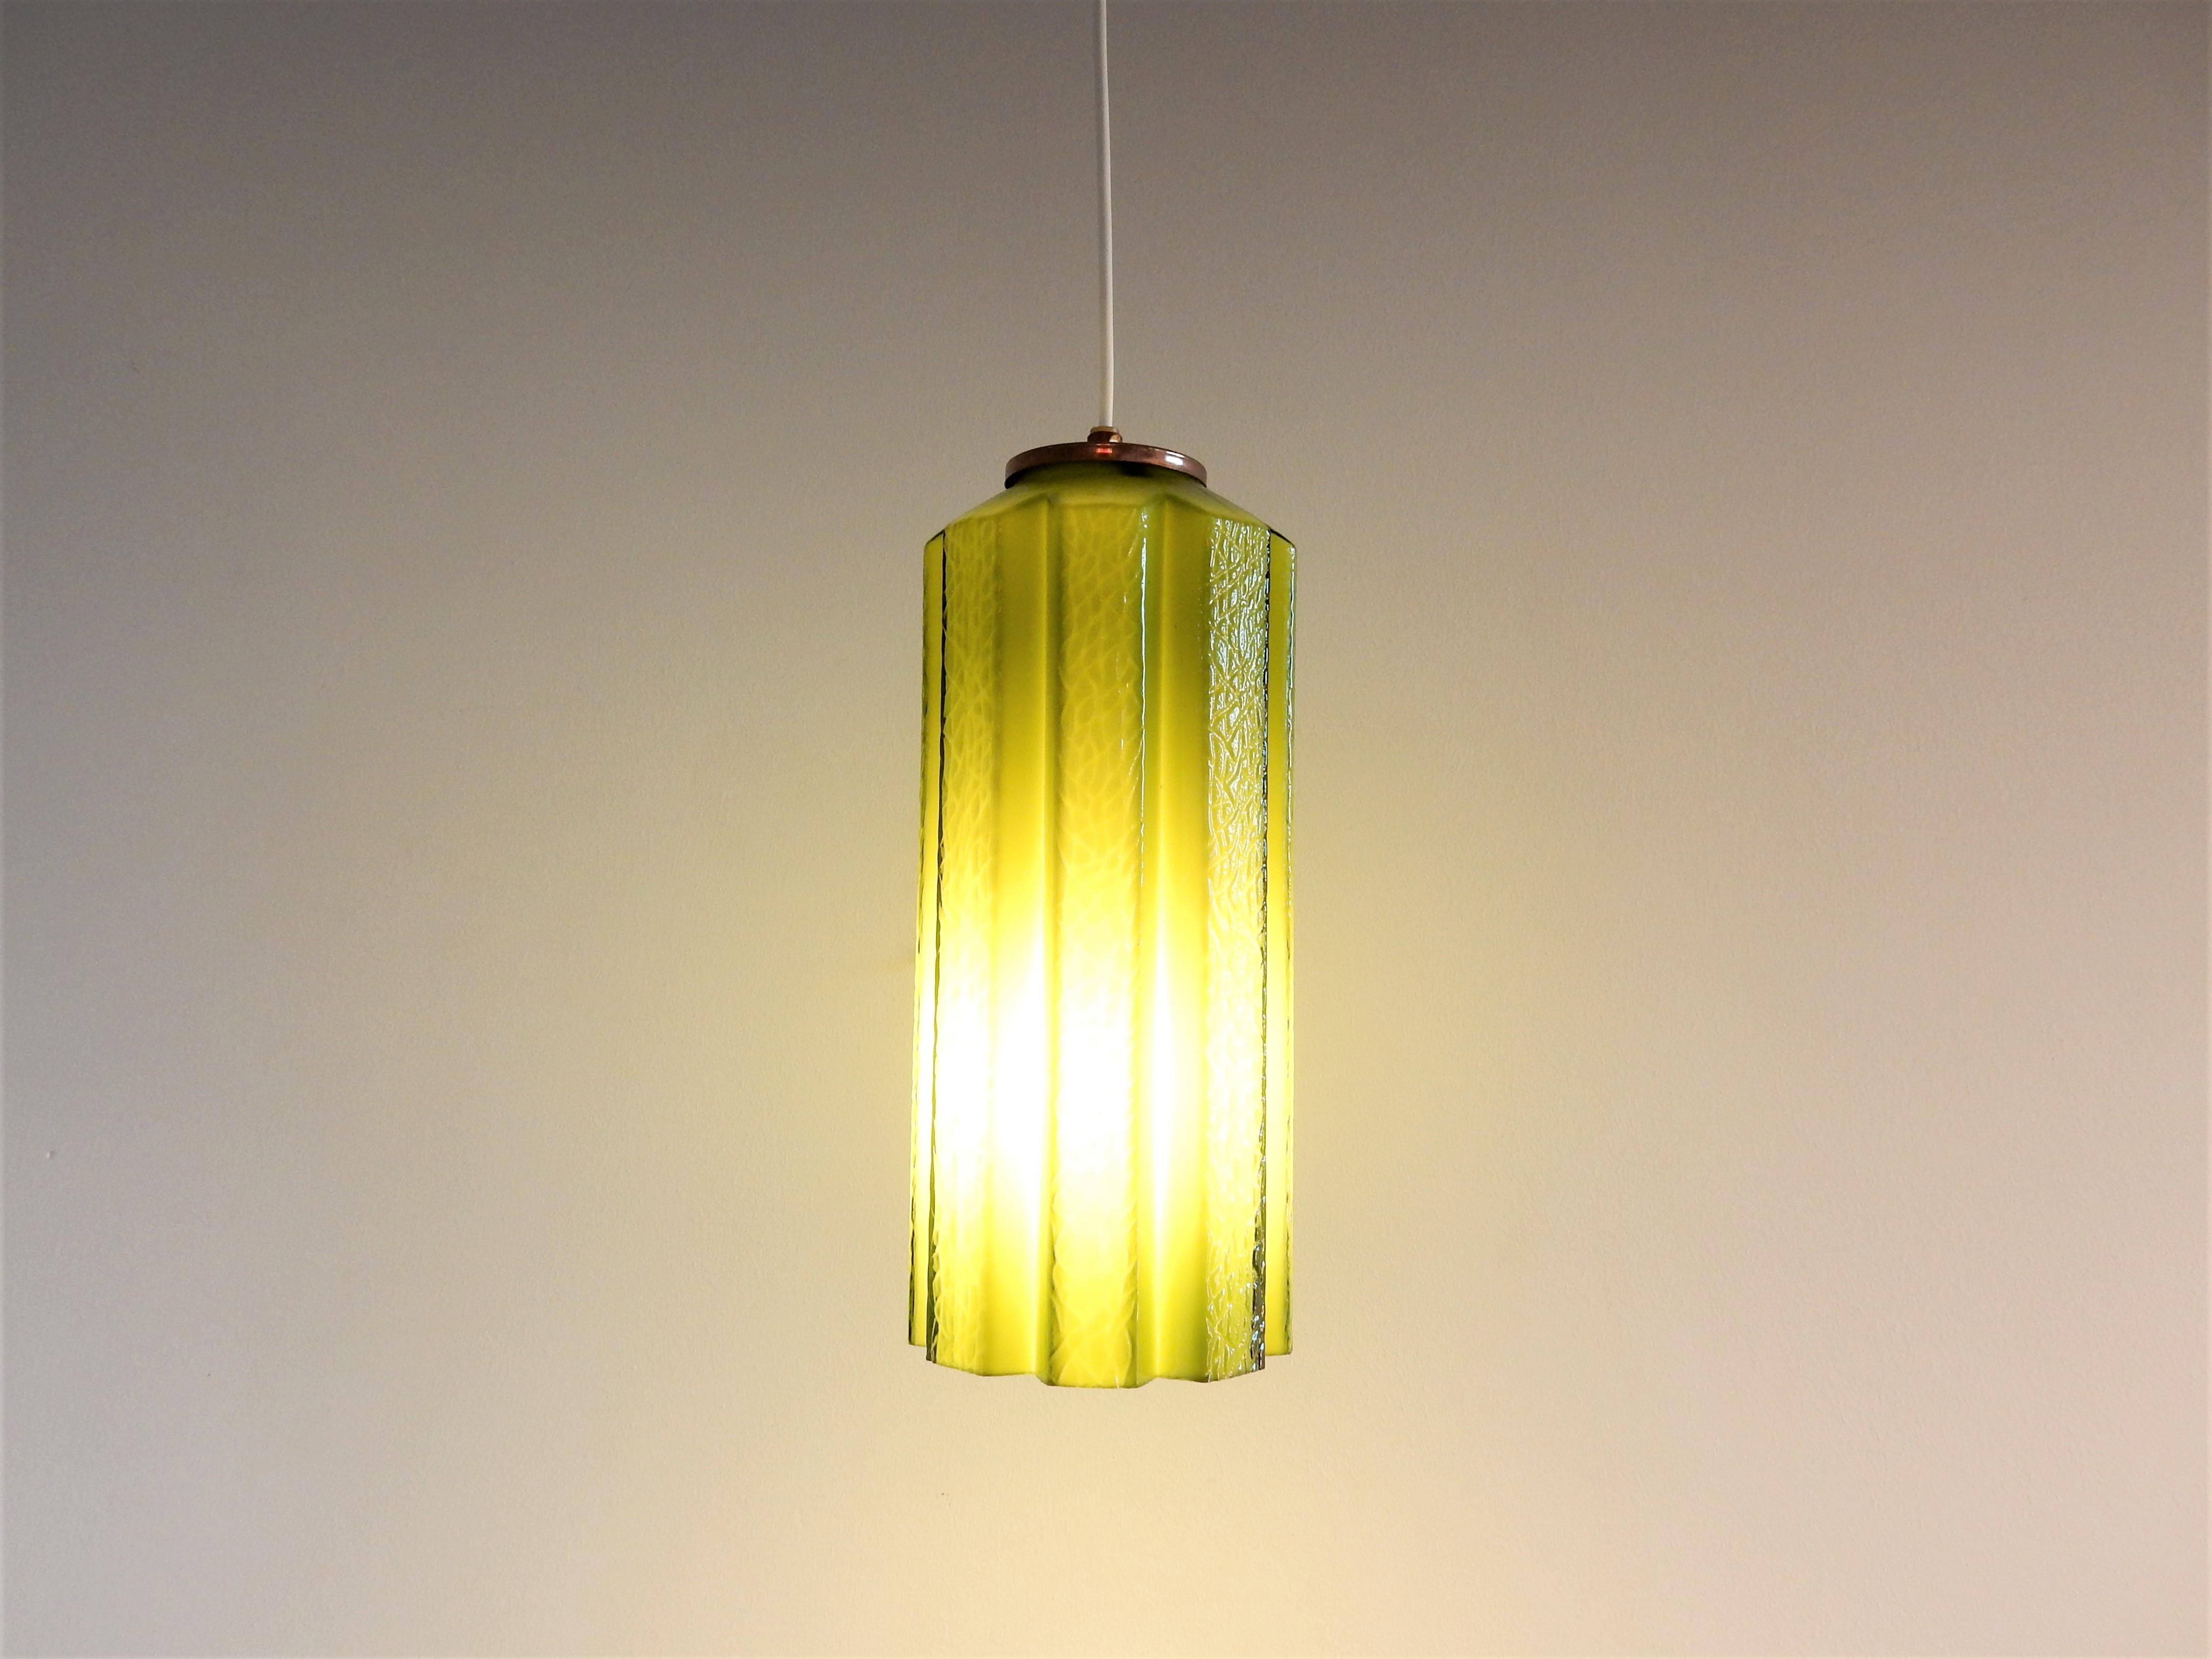 Mid-20th Century Green Glass Pendant Lamp by Helena Tynell for Flygsfors Glasbruk, Sweden 1960s For Sale